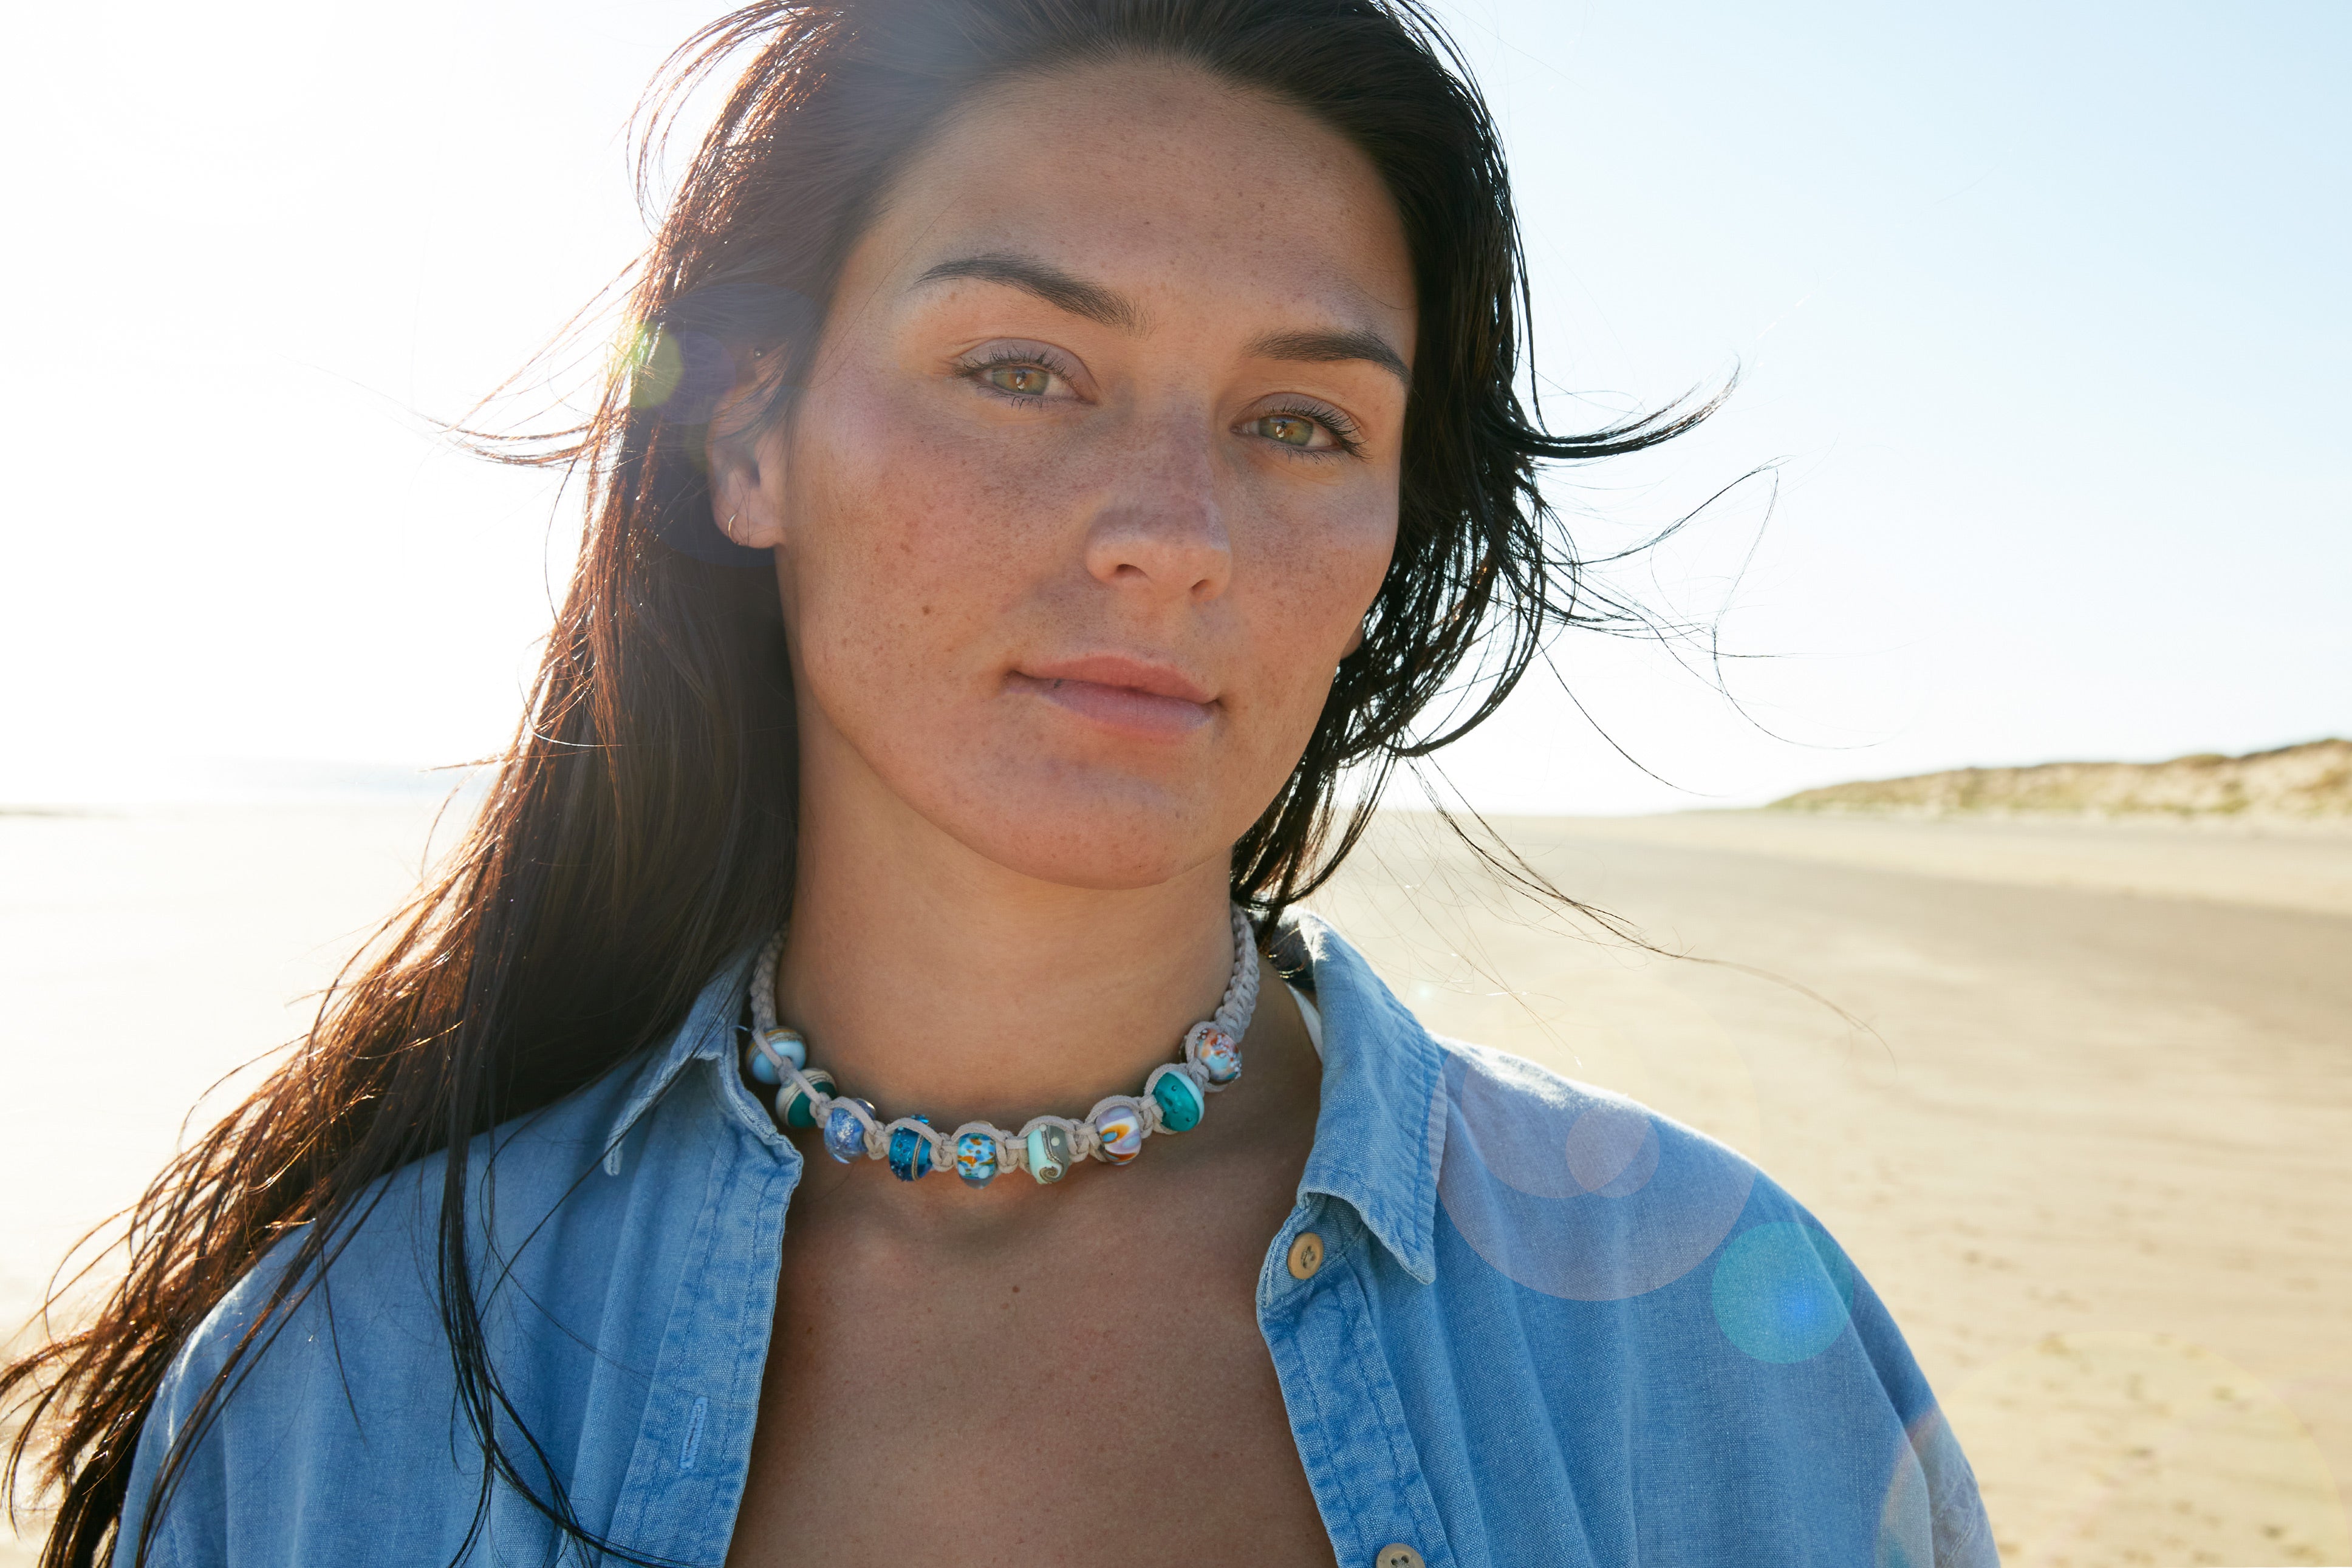 Beach surfer style macrame choker necklace made with glass beads representing Cornish beaches.